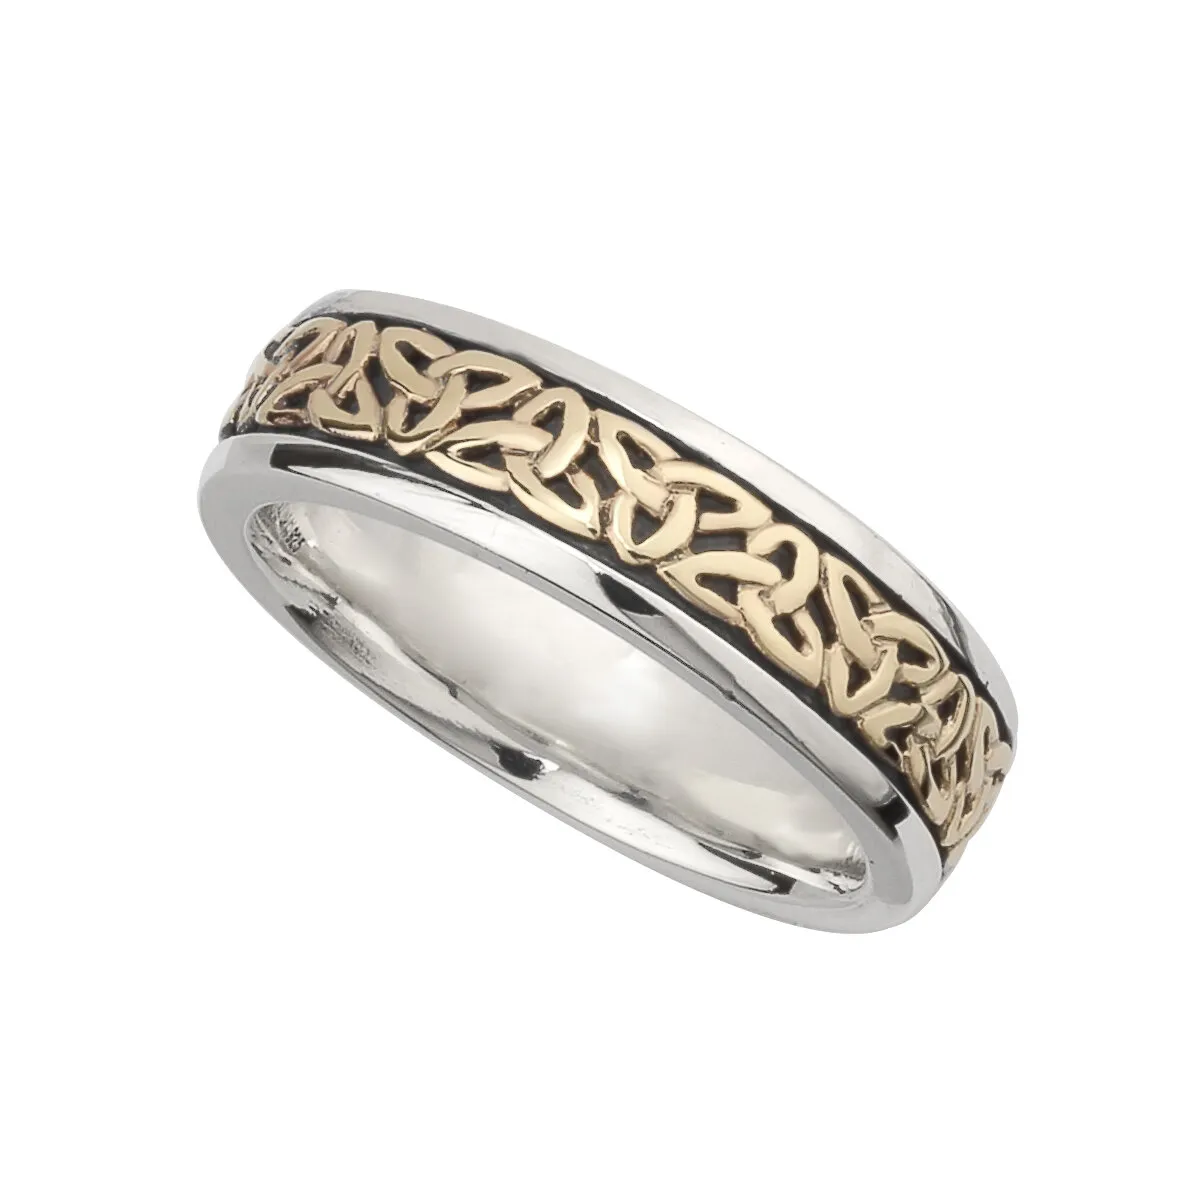 Ladies Silver & Gold Trinity Knot Ring...